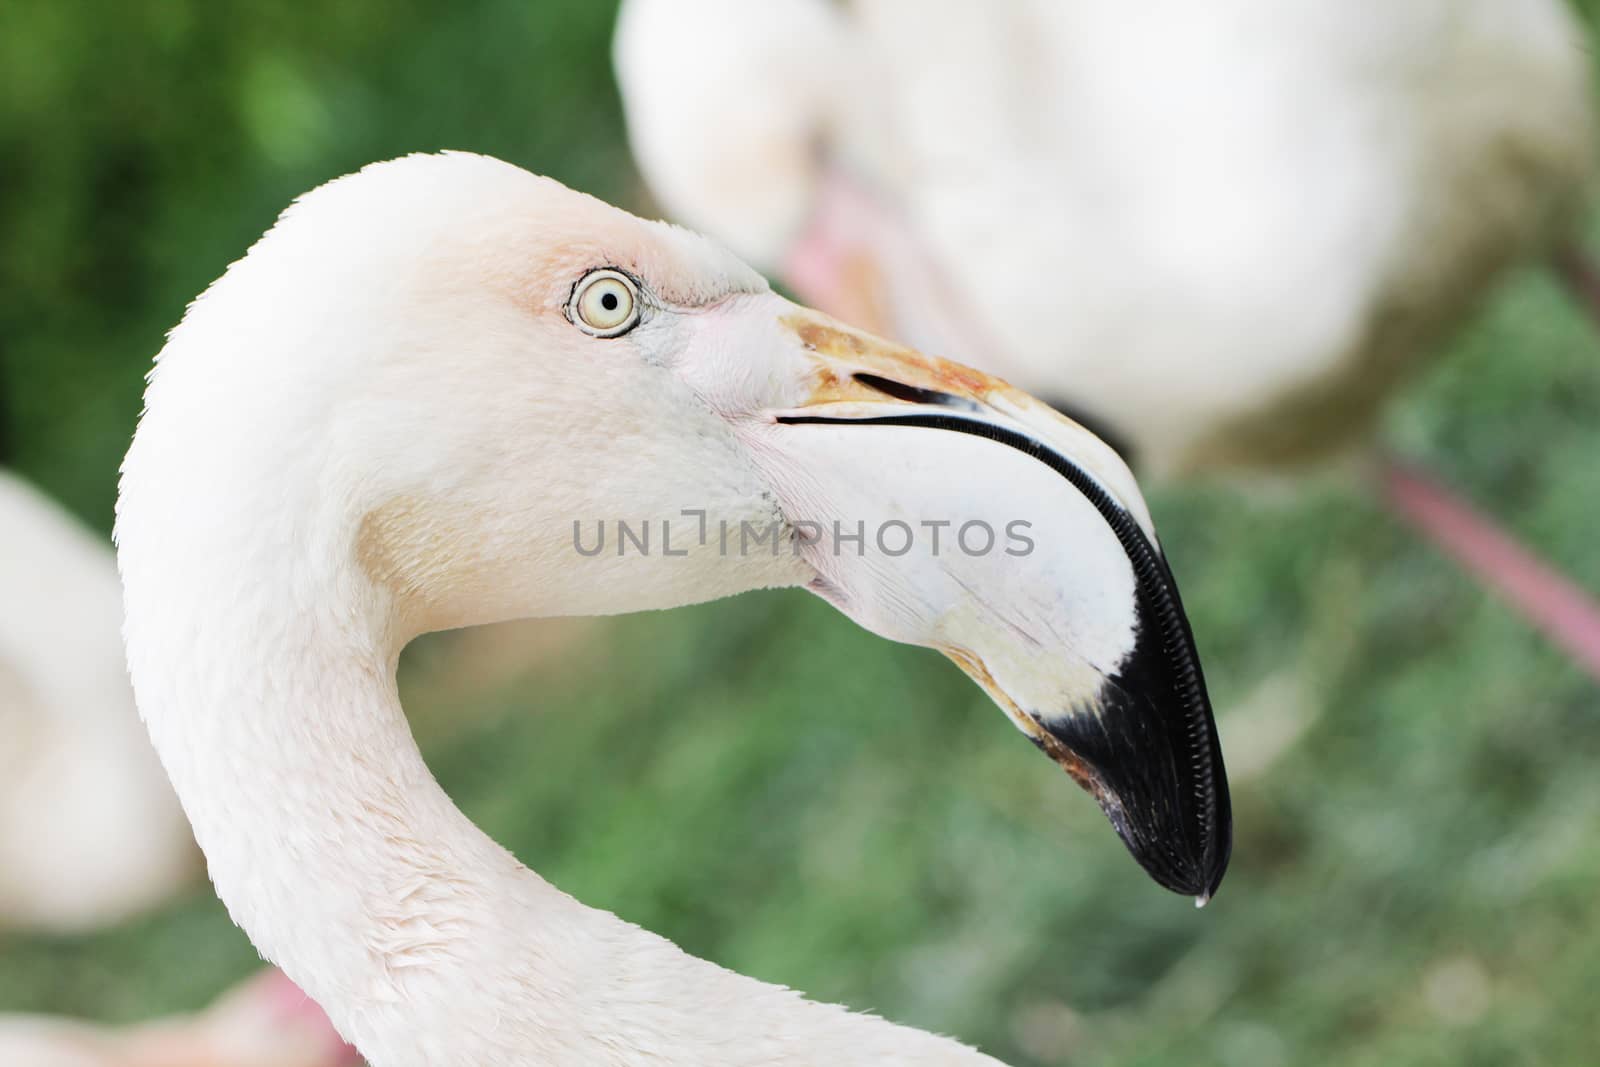 Head of flamingo by Voinakh